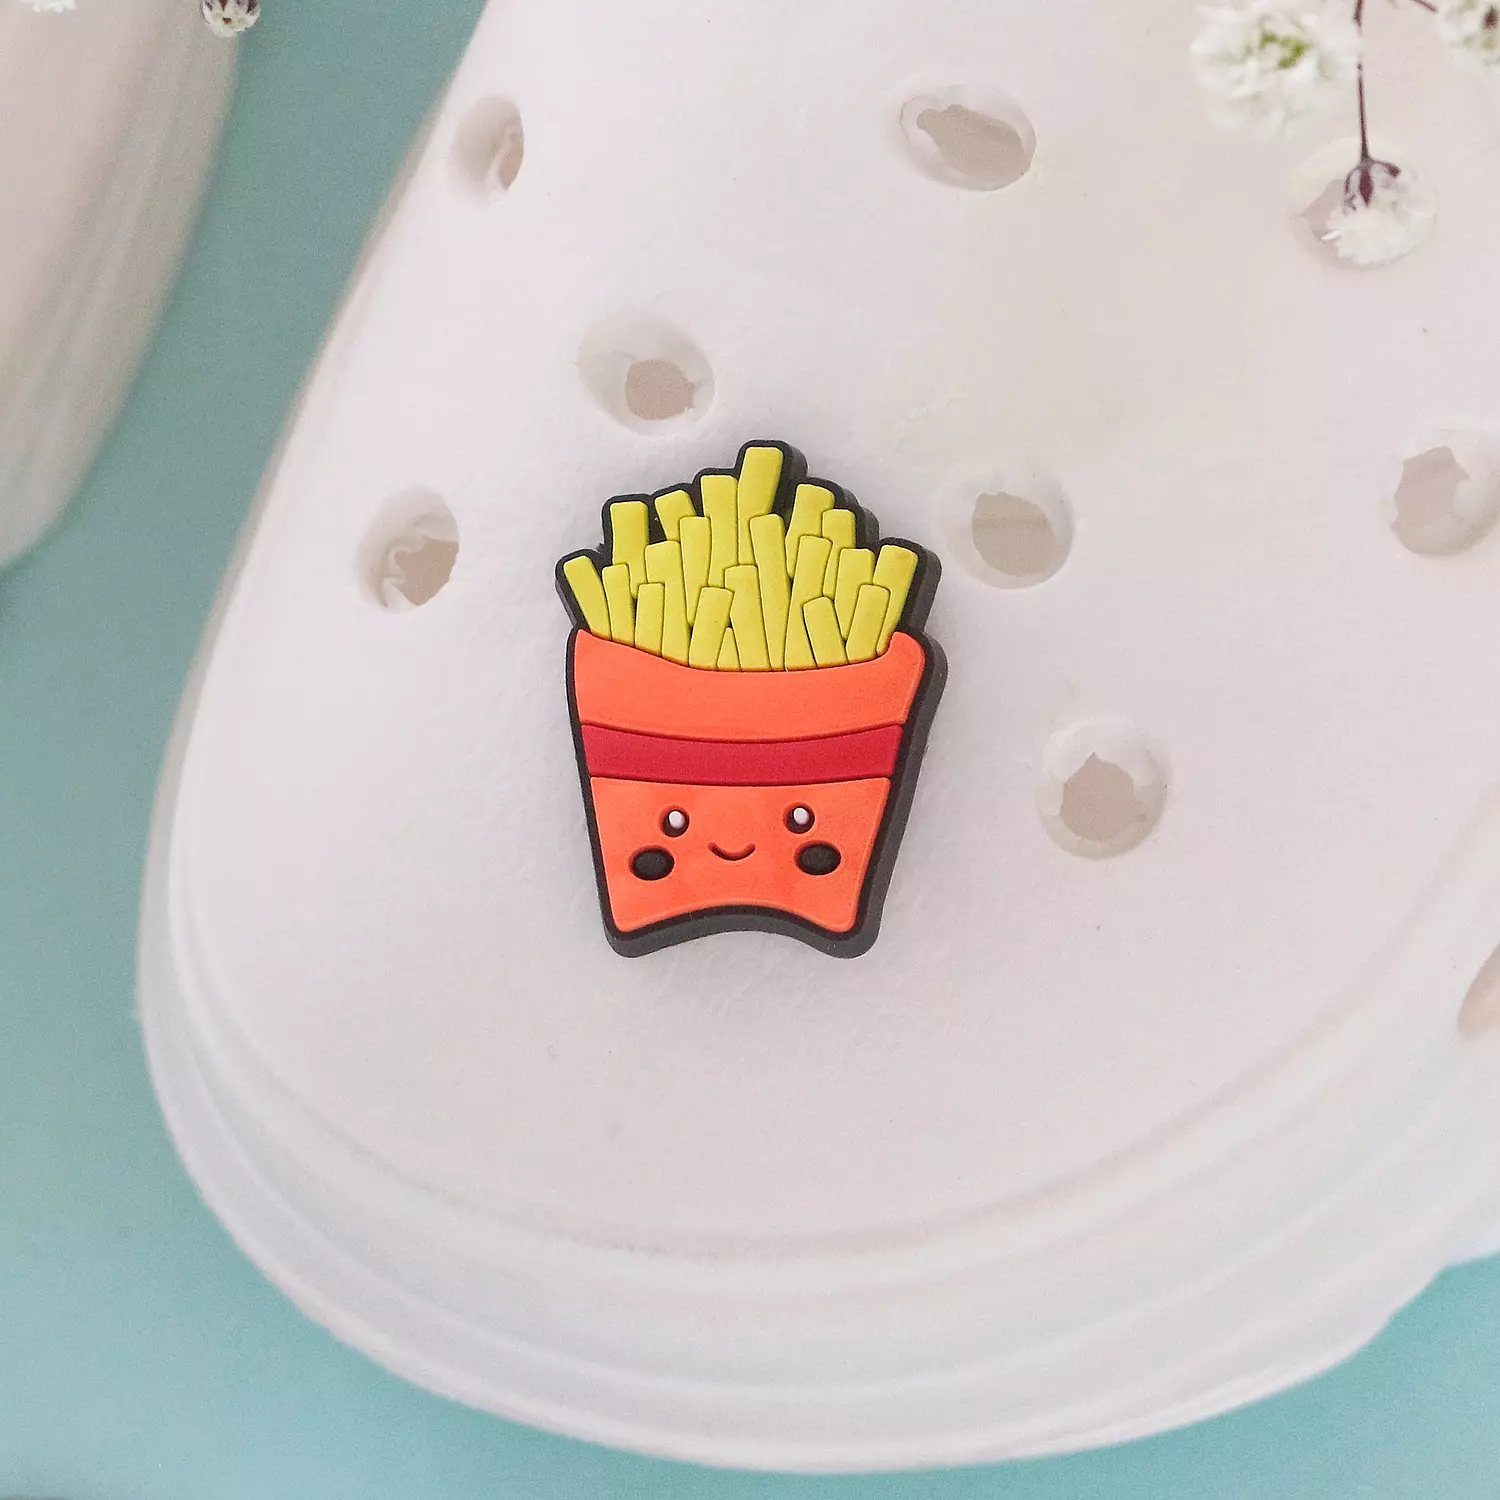 French Fries 🍟 hover image